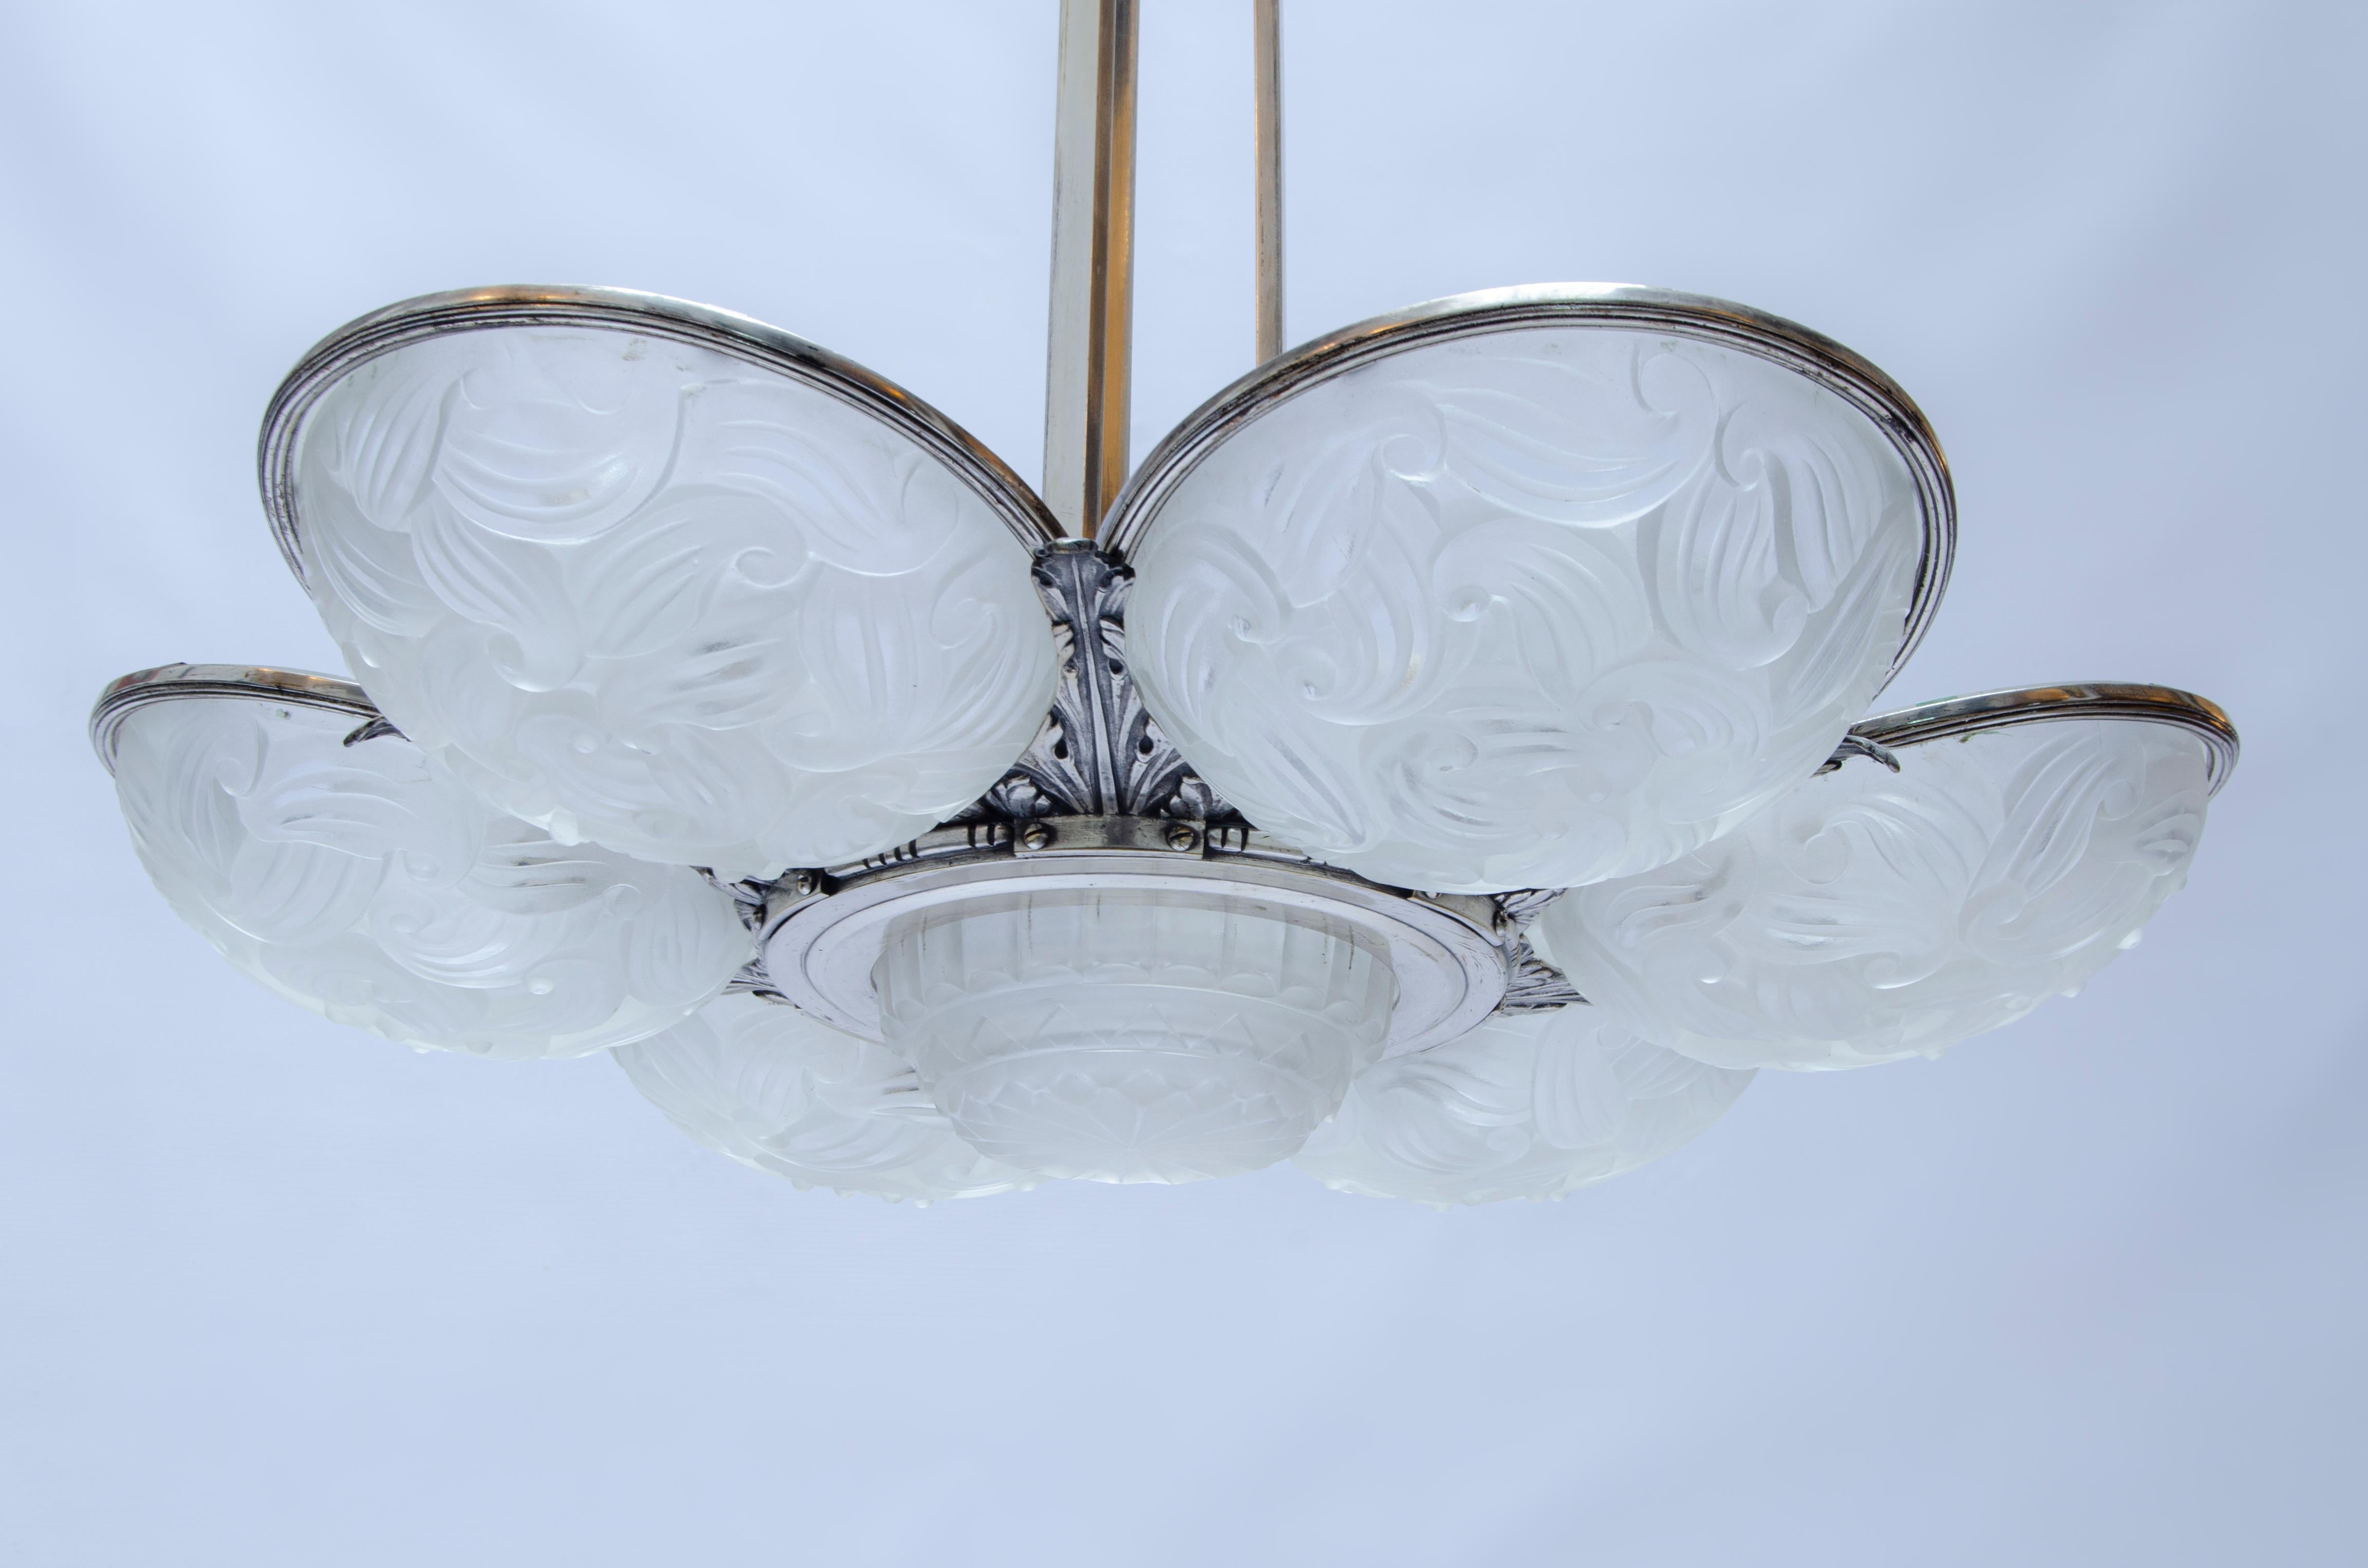 French Art Deco Chandelier For Sale